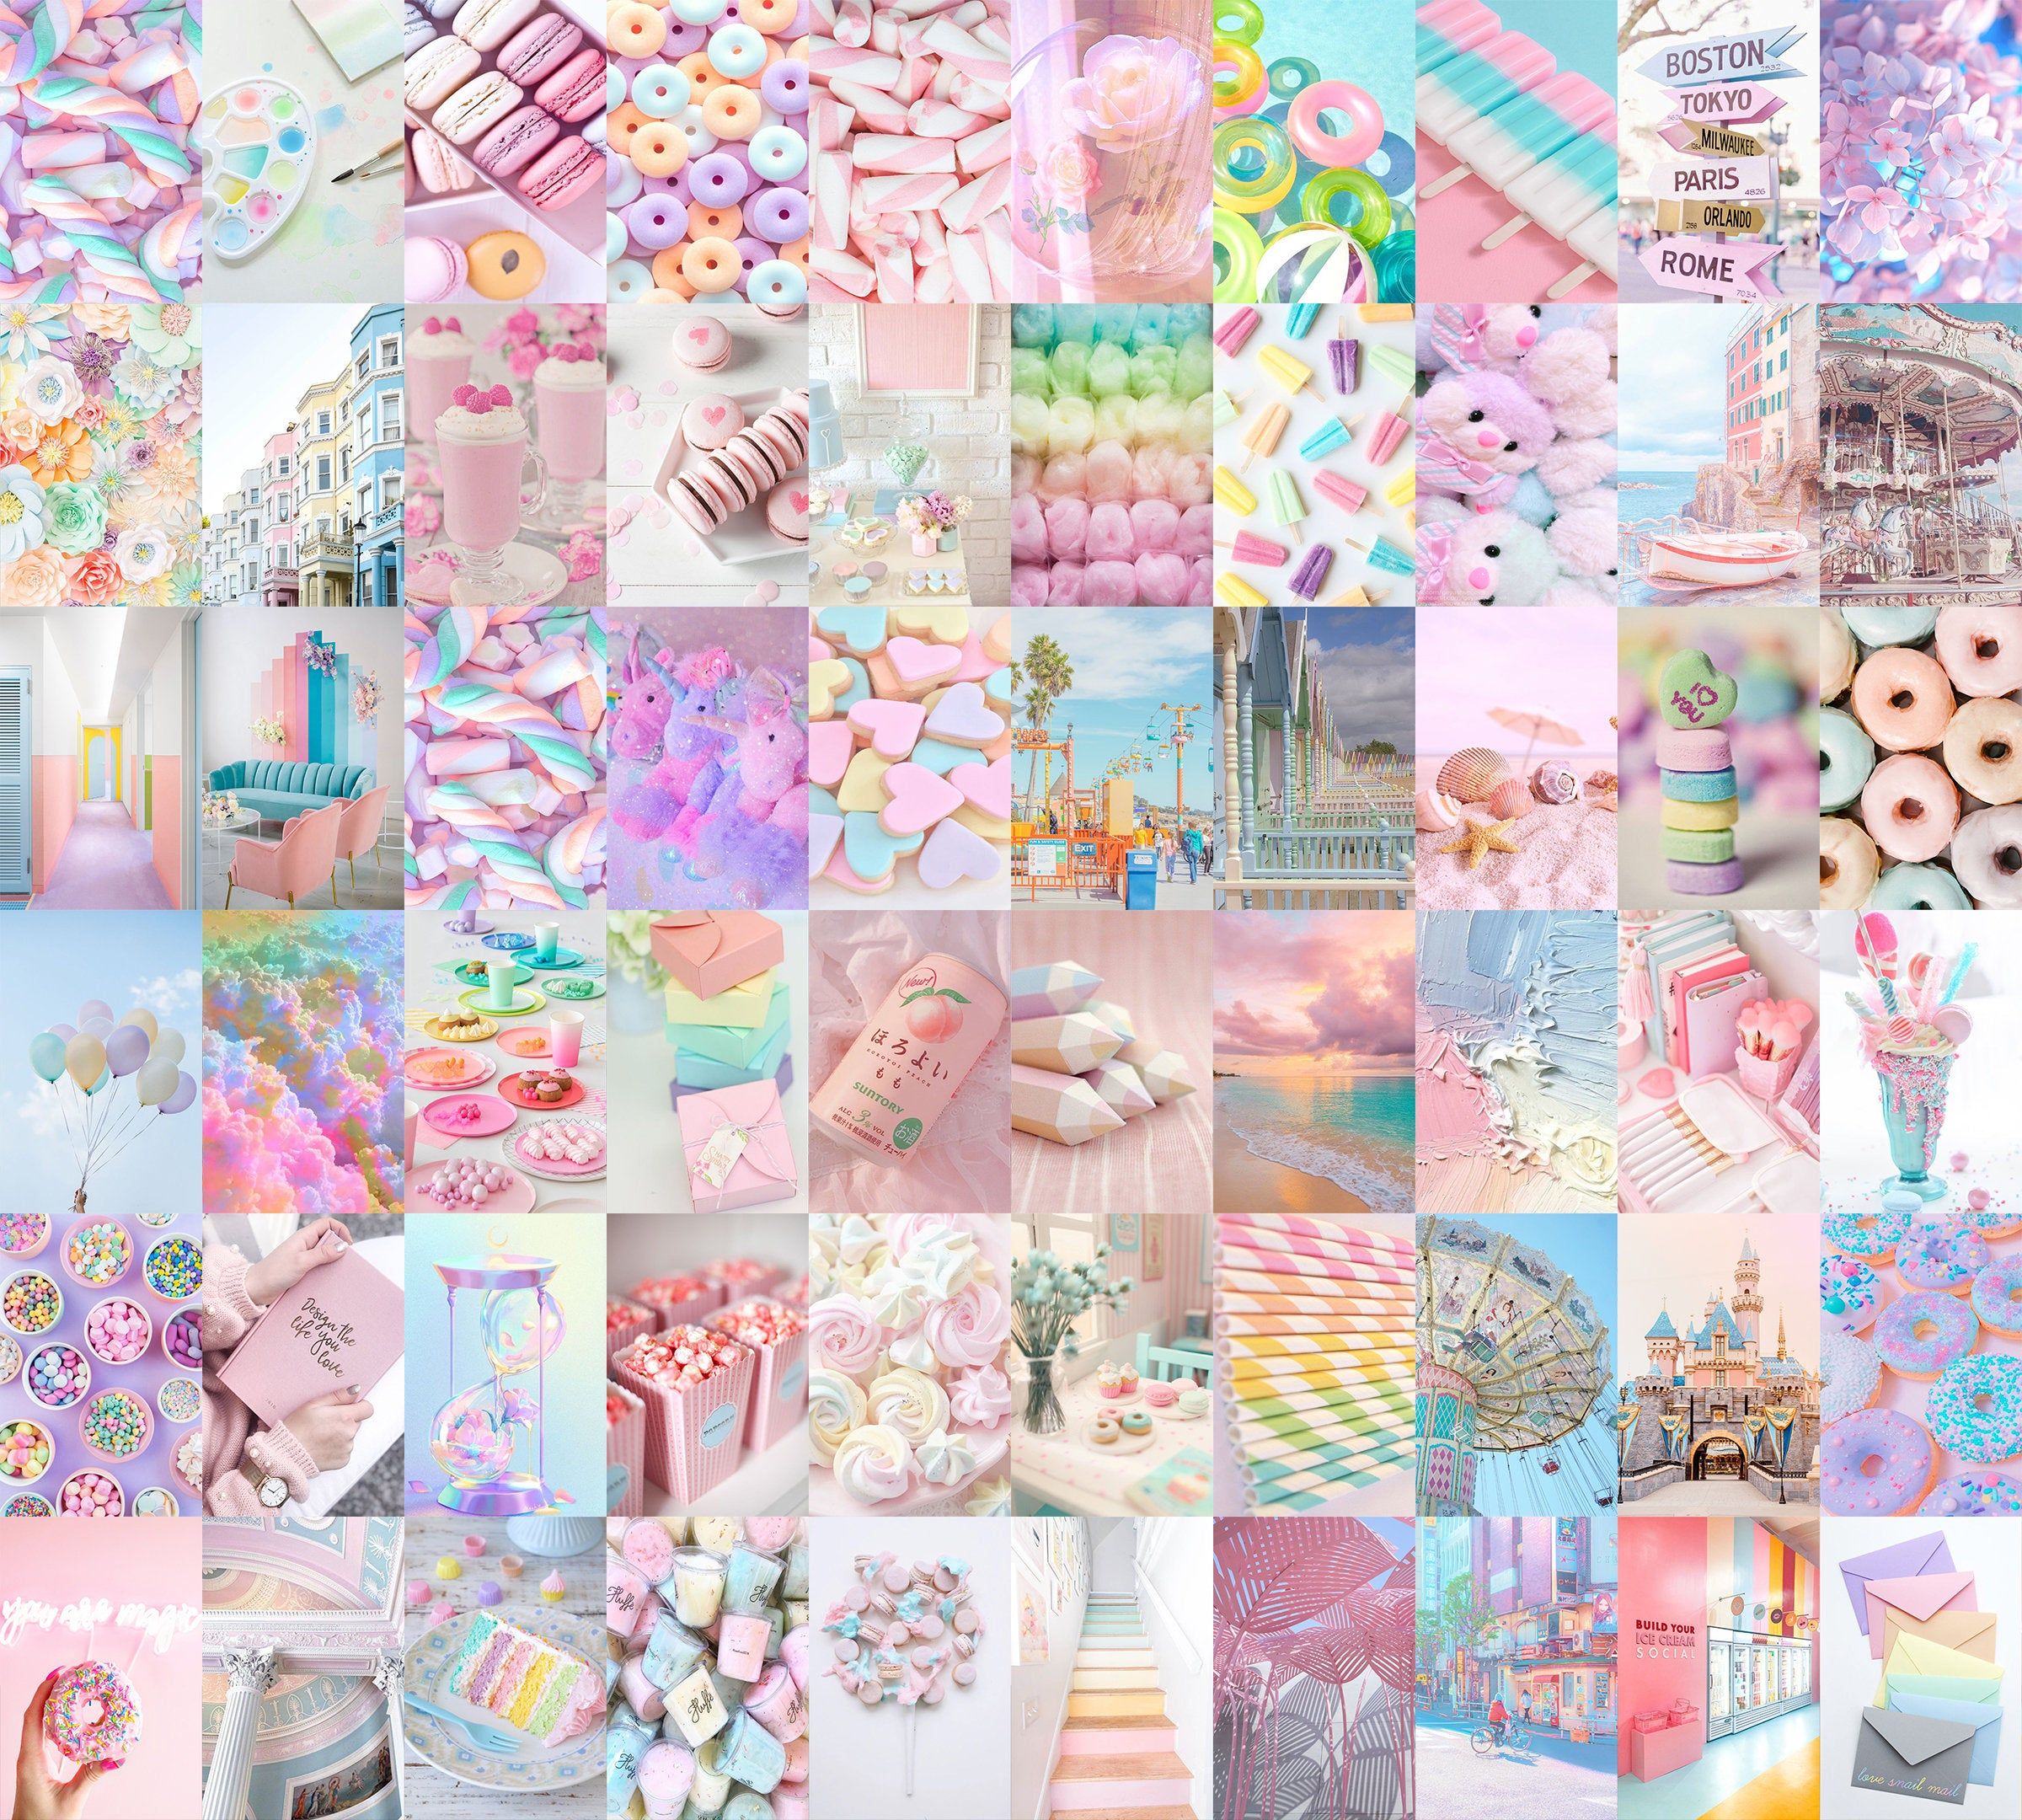 Colorful pastel cotton candy rainbow aesthetic wall collage